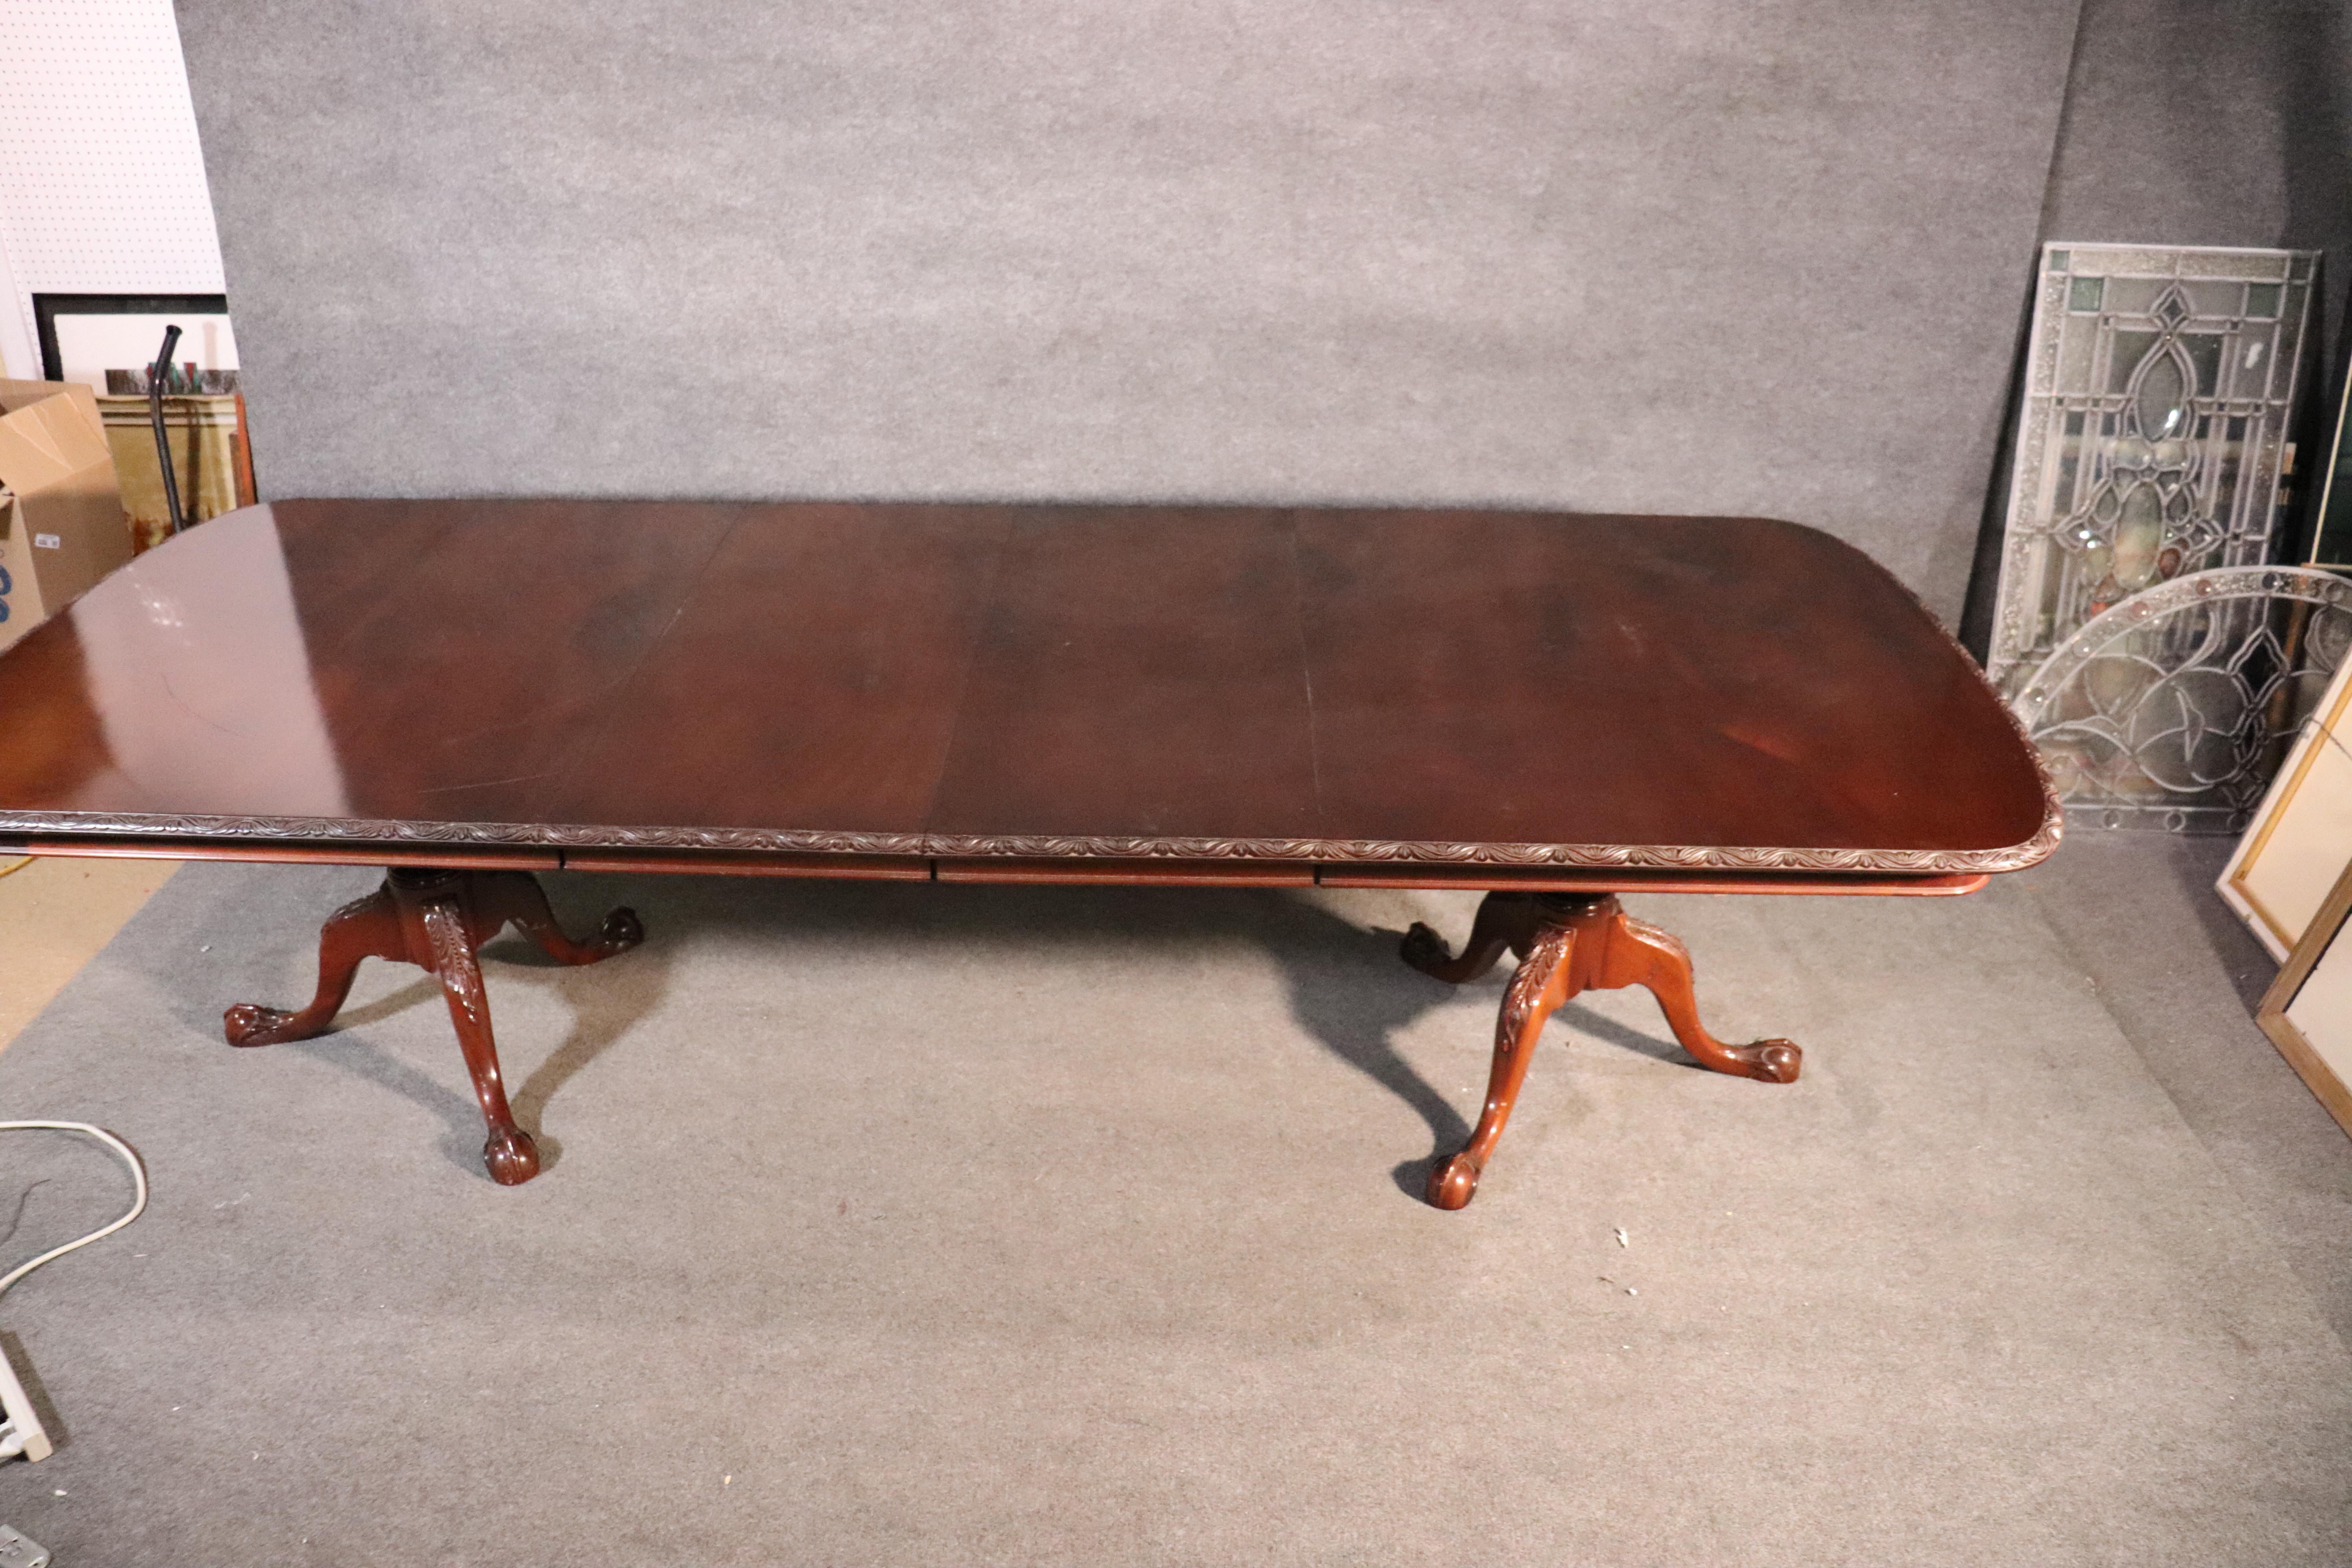 This is a very high quality table, circa 1940. The table has two leaves that each measure 19 inches for an additional 38 inches of length. The table measures 80 inches long x 47 wide x 30 inches tall. The leaves add to that 80 inches for a great